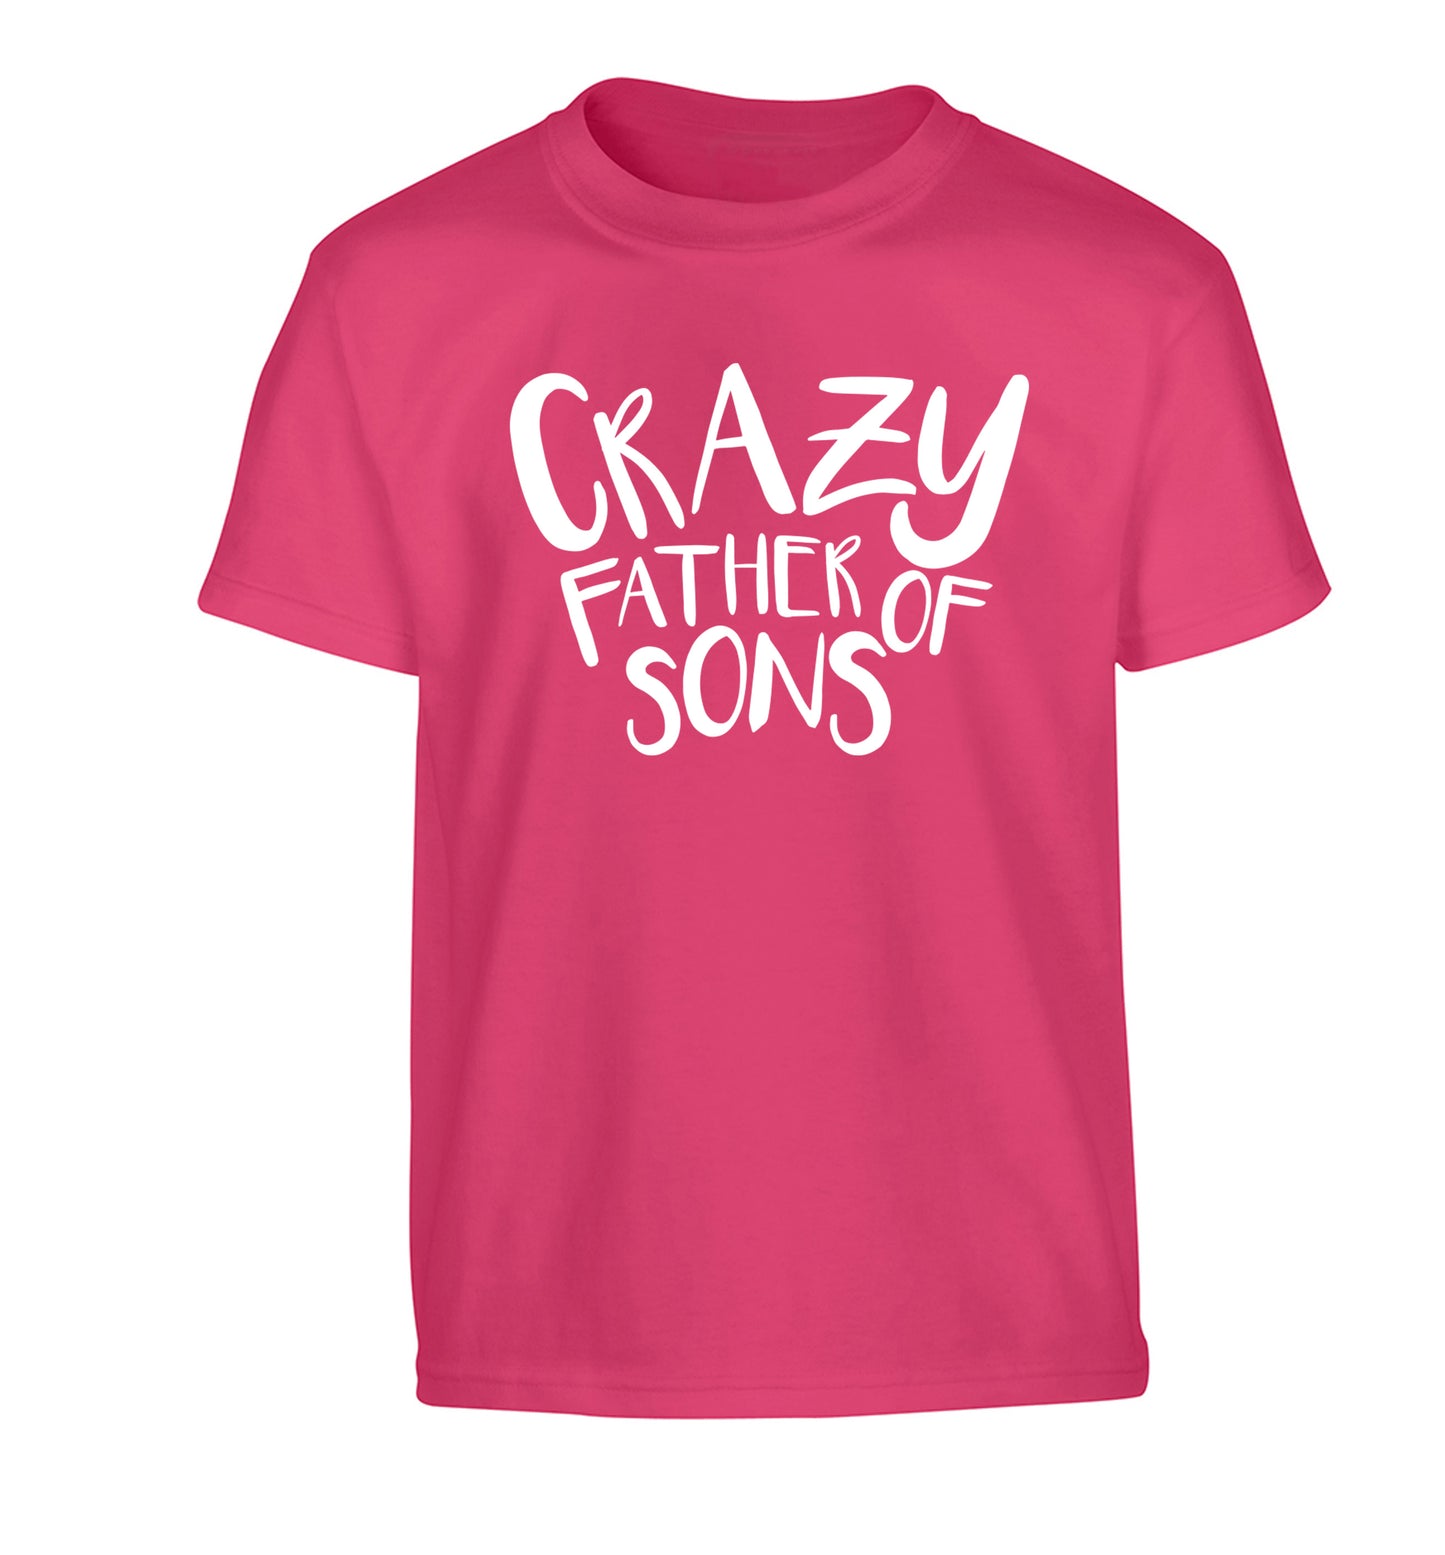 Crazy father of sons Children's pink Tshirt 12-13 Years